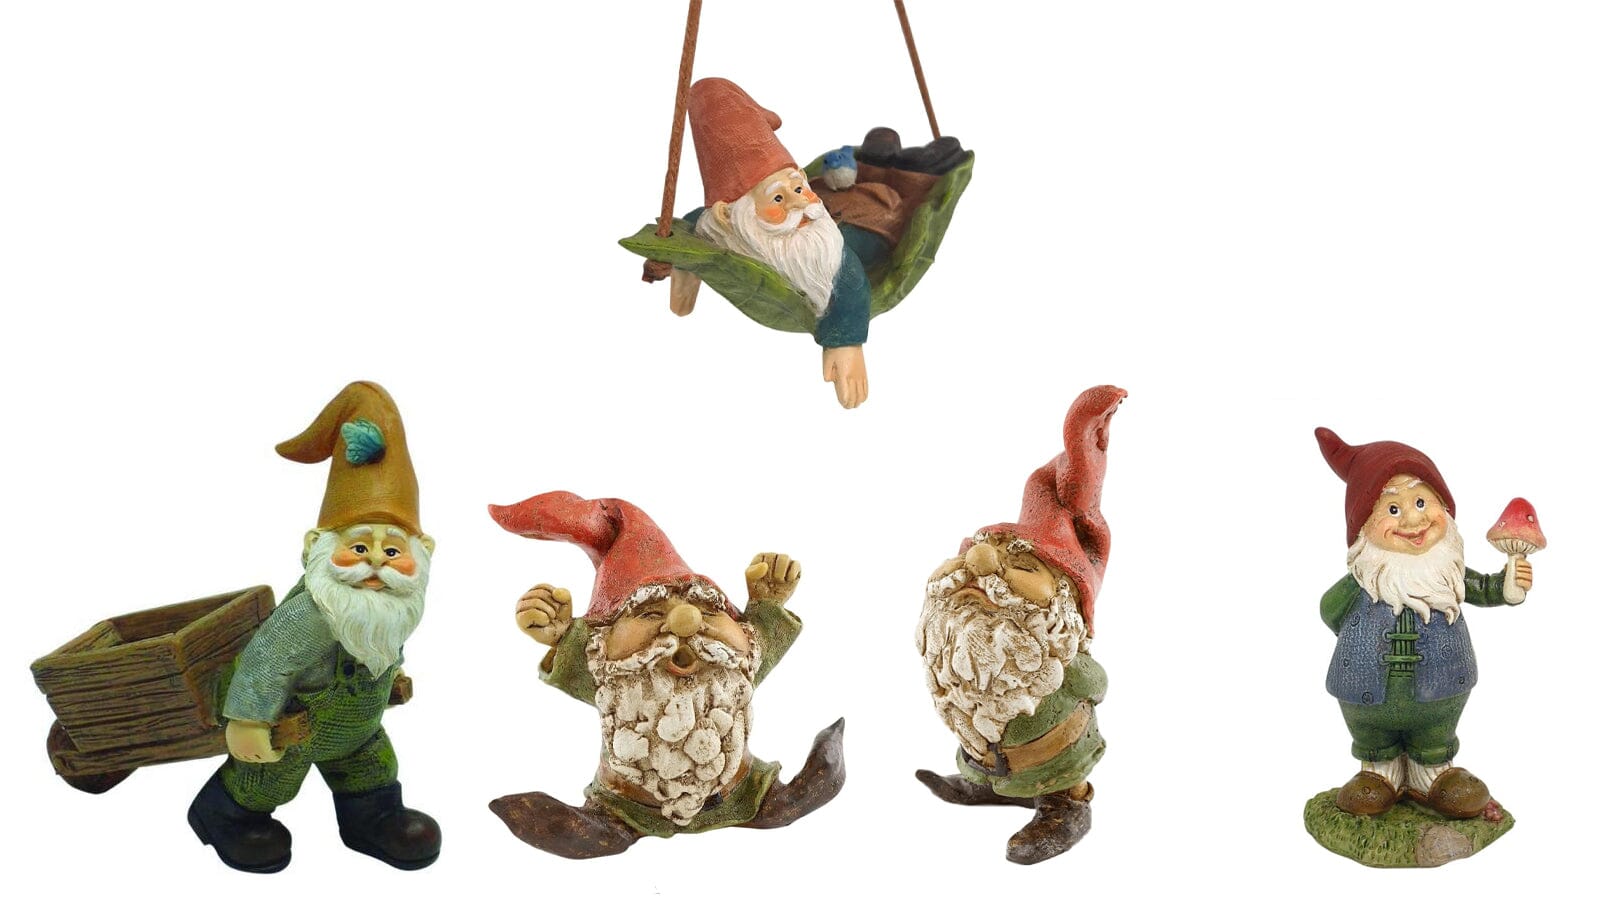 All Gnomes, Pixies, & Elves